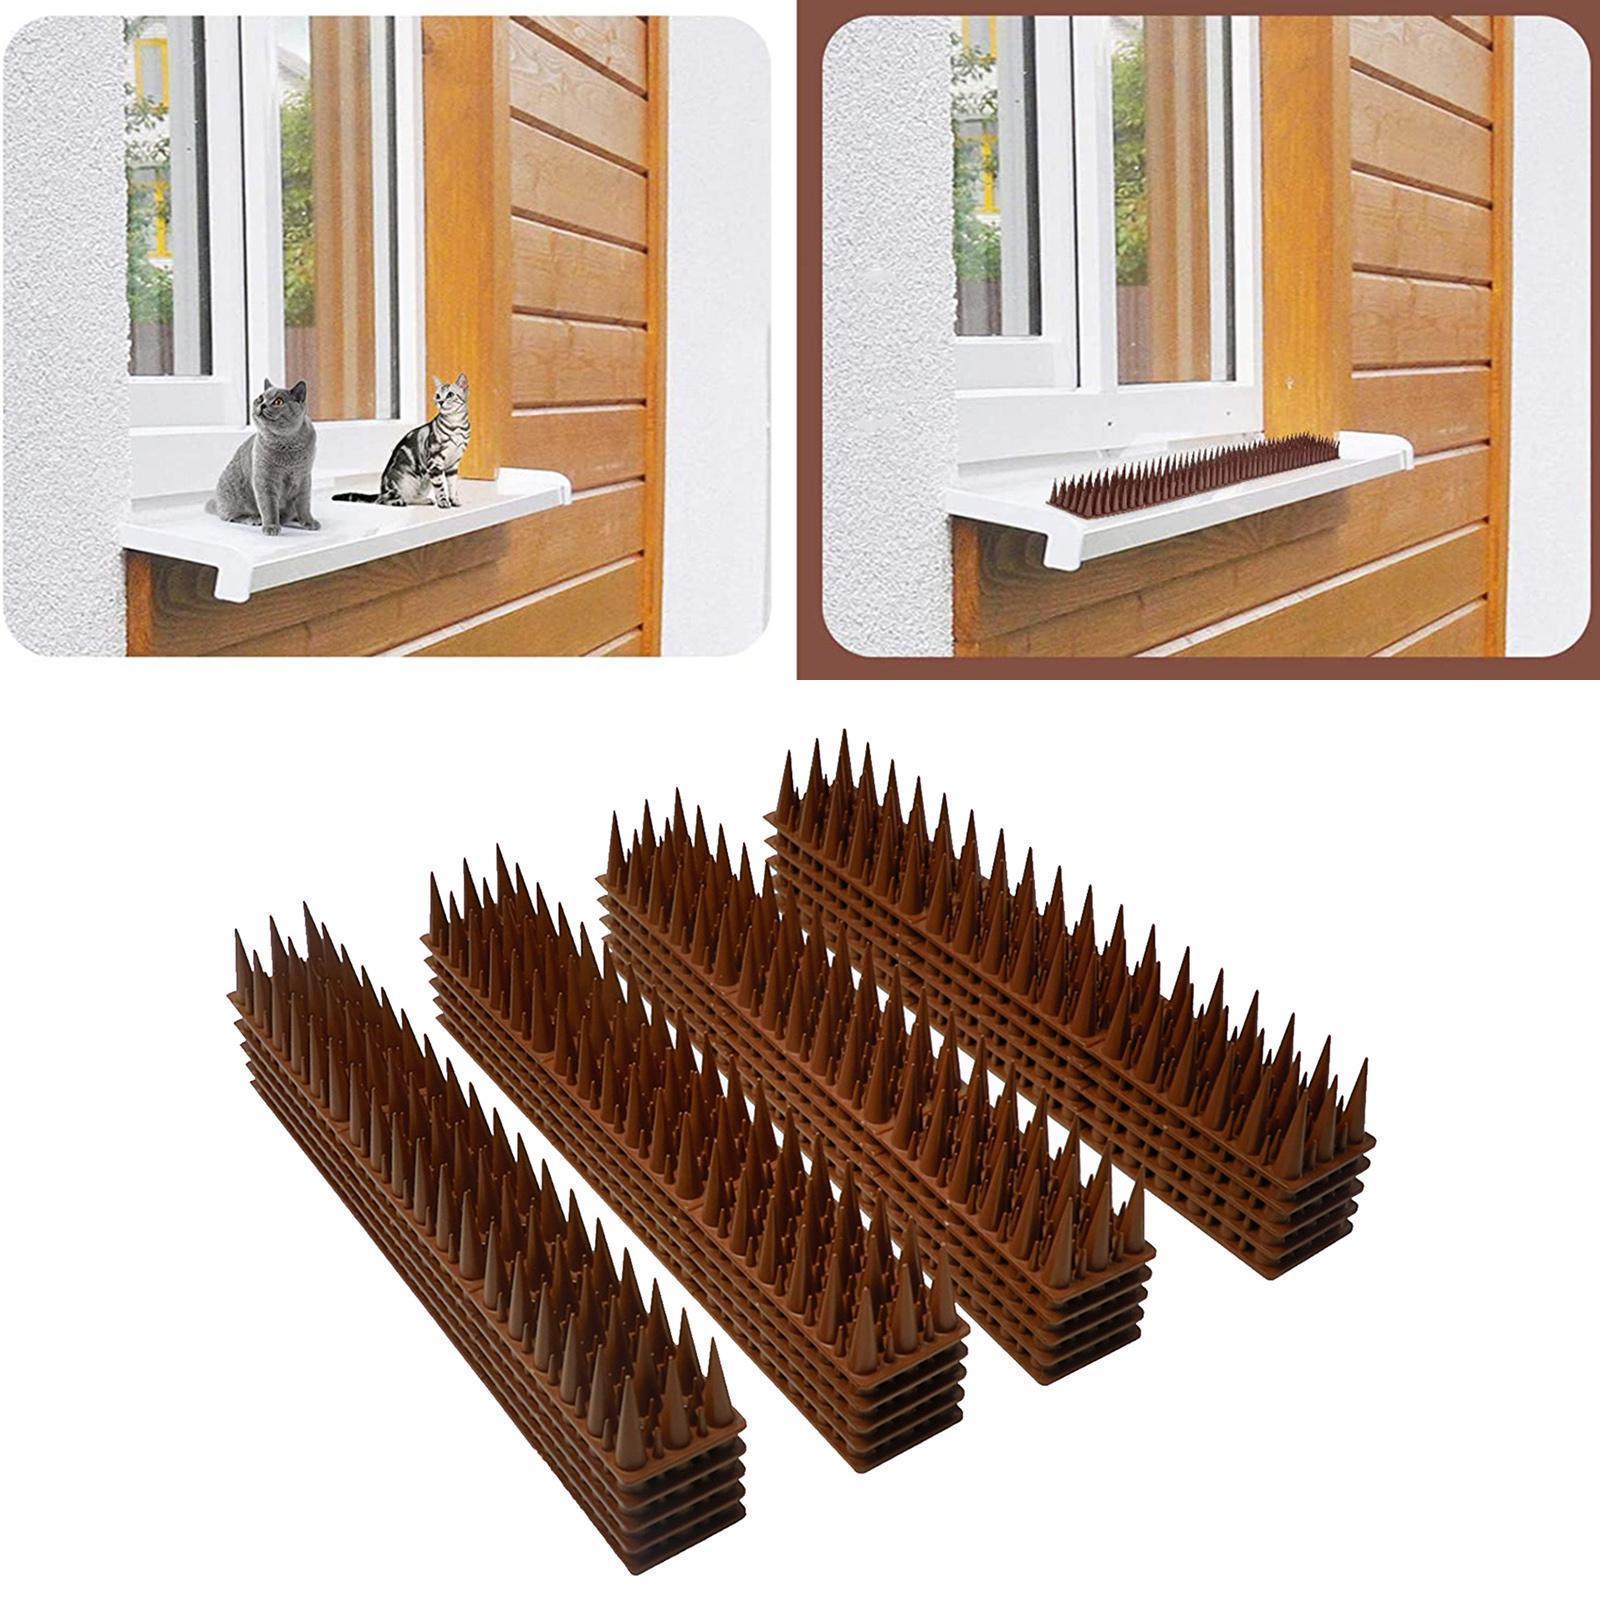 Gate Wall Cat Spikes Security Bird Repellent Intruder Prickle Strips Guard